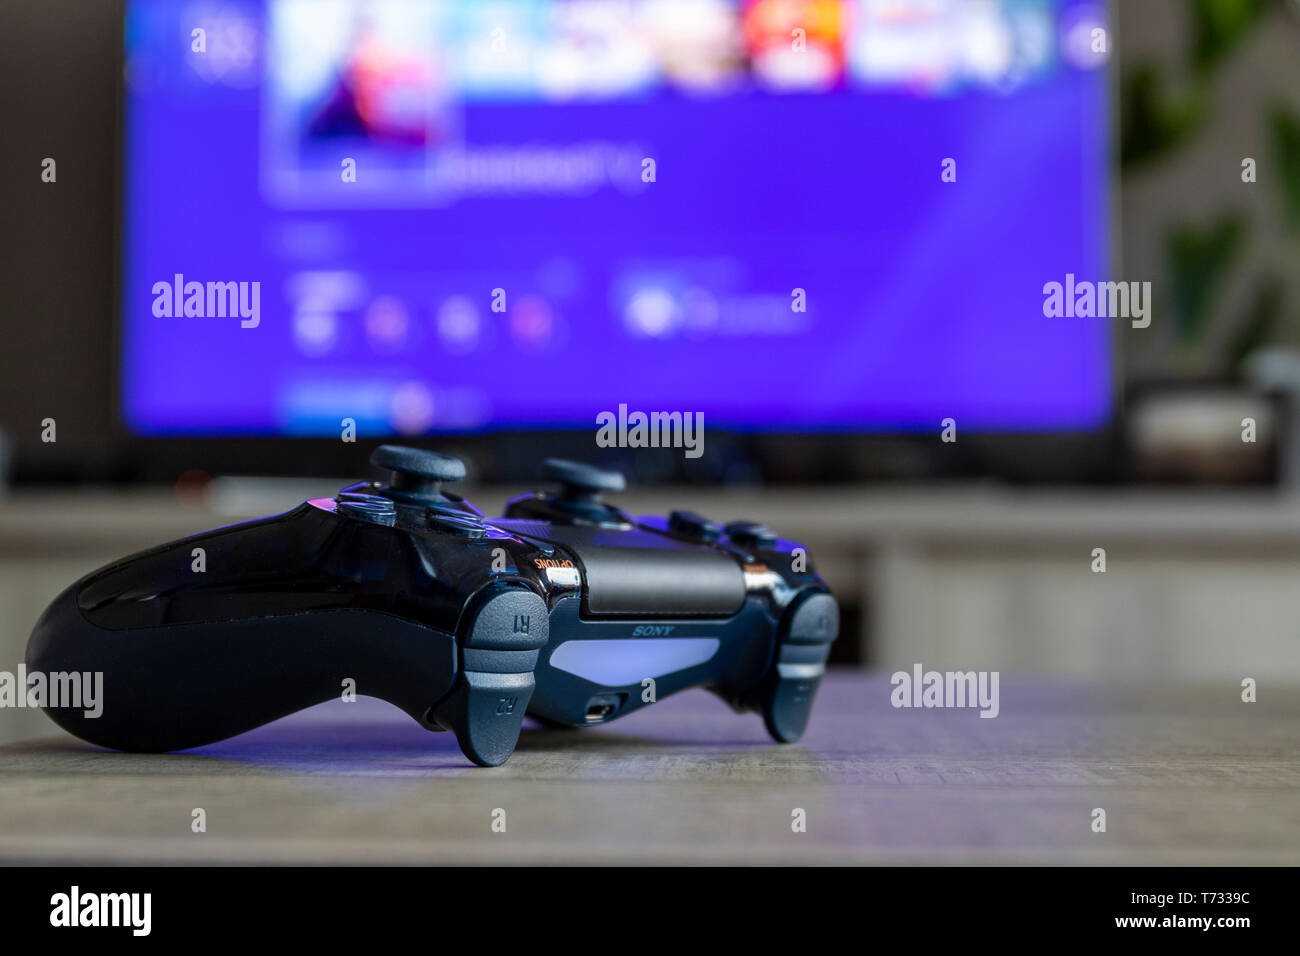 A portrait of a Playstation 4 controller, which is turned on, in front of a  blurred television showing the Playstation home screen Stock Photo - Alamy